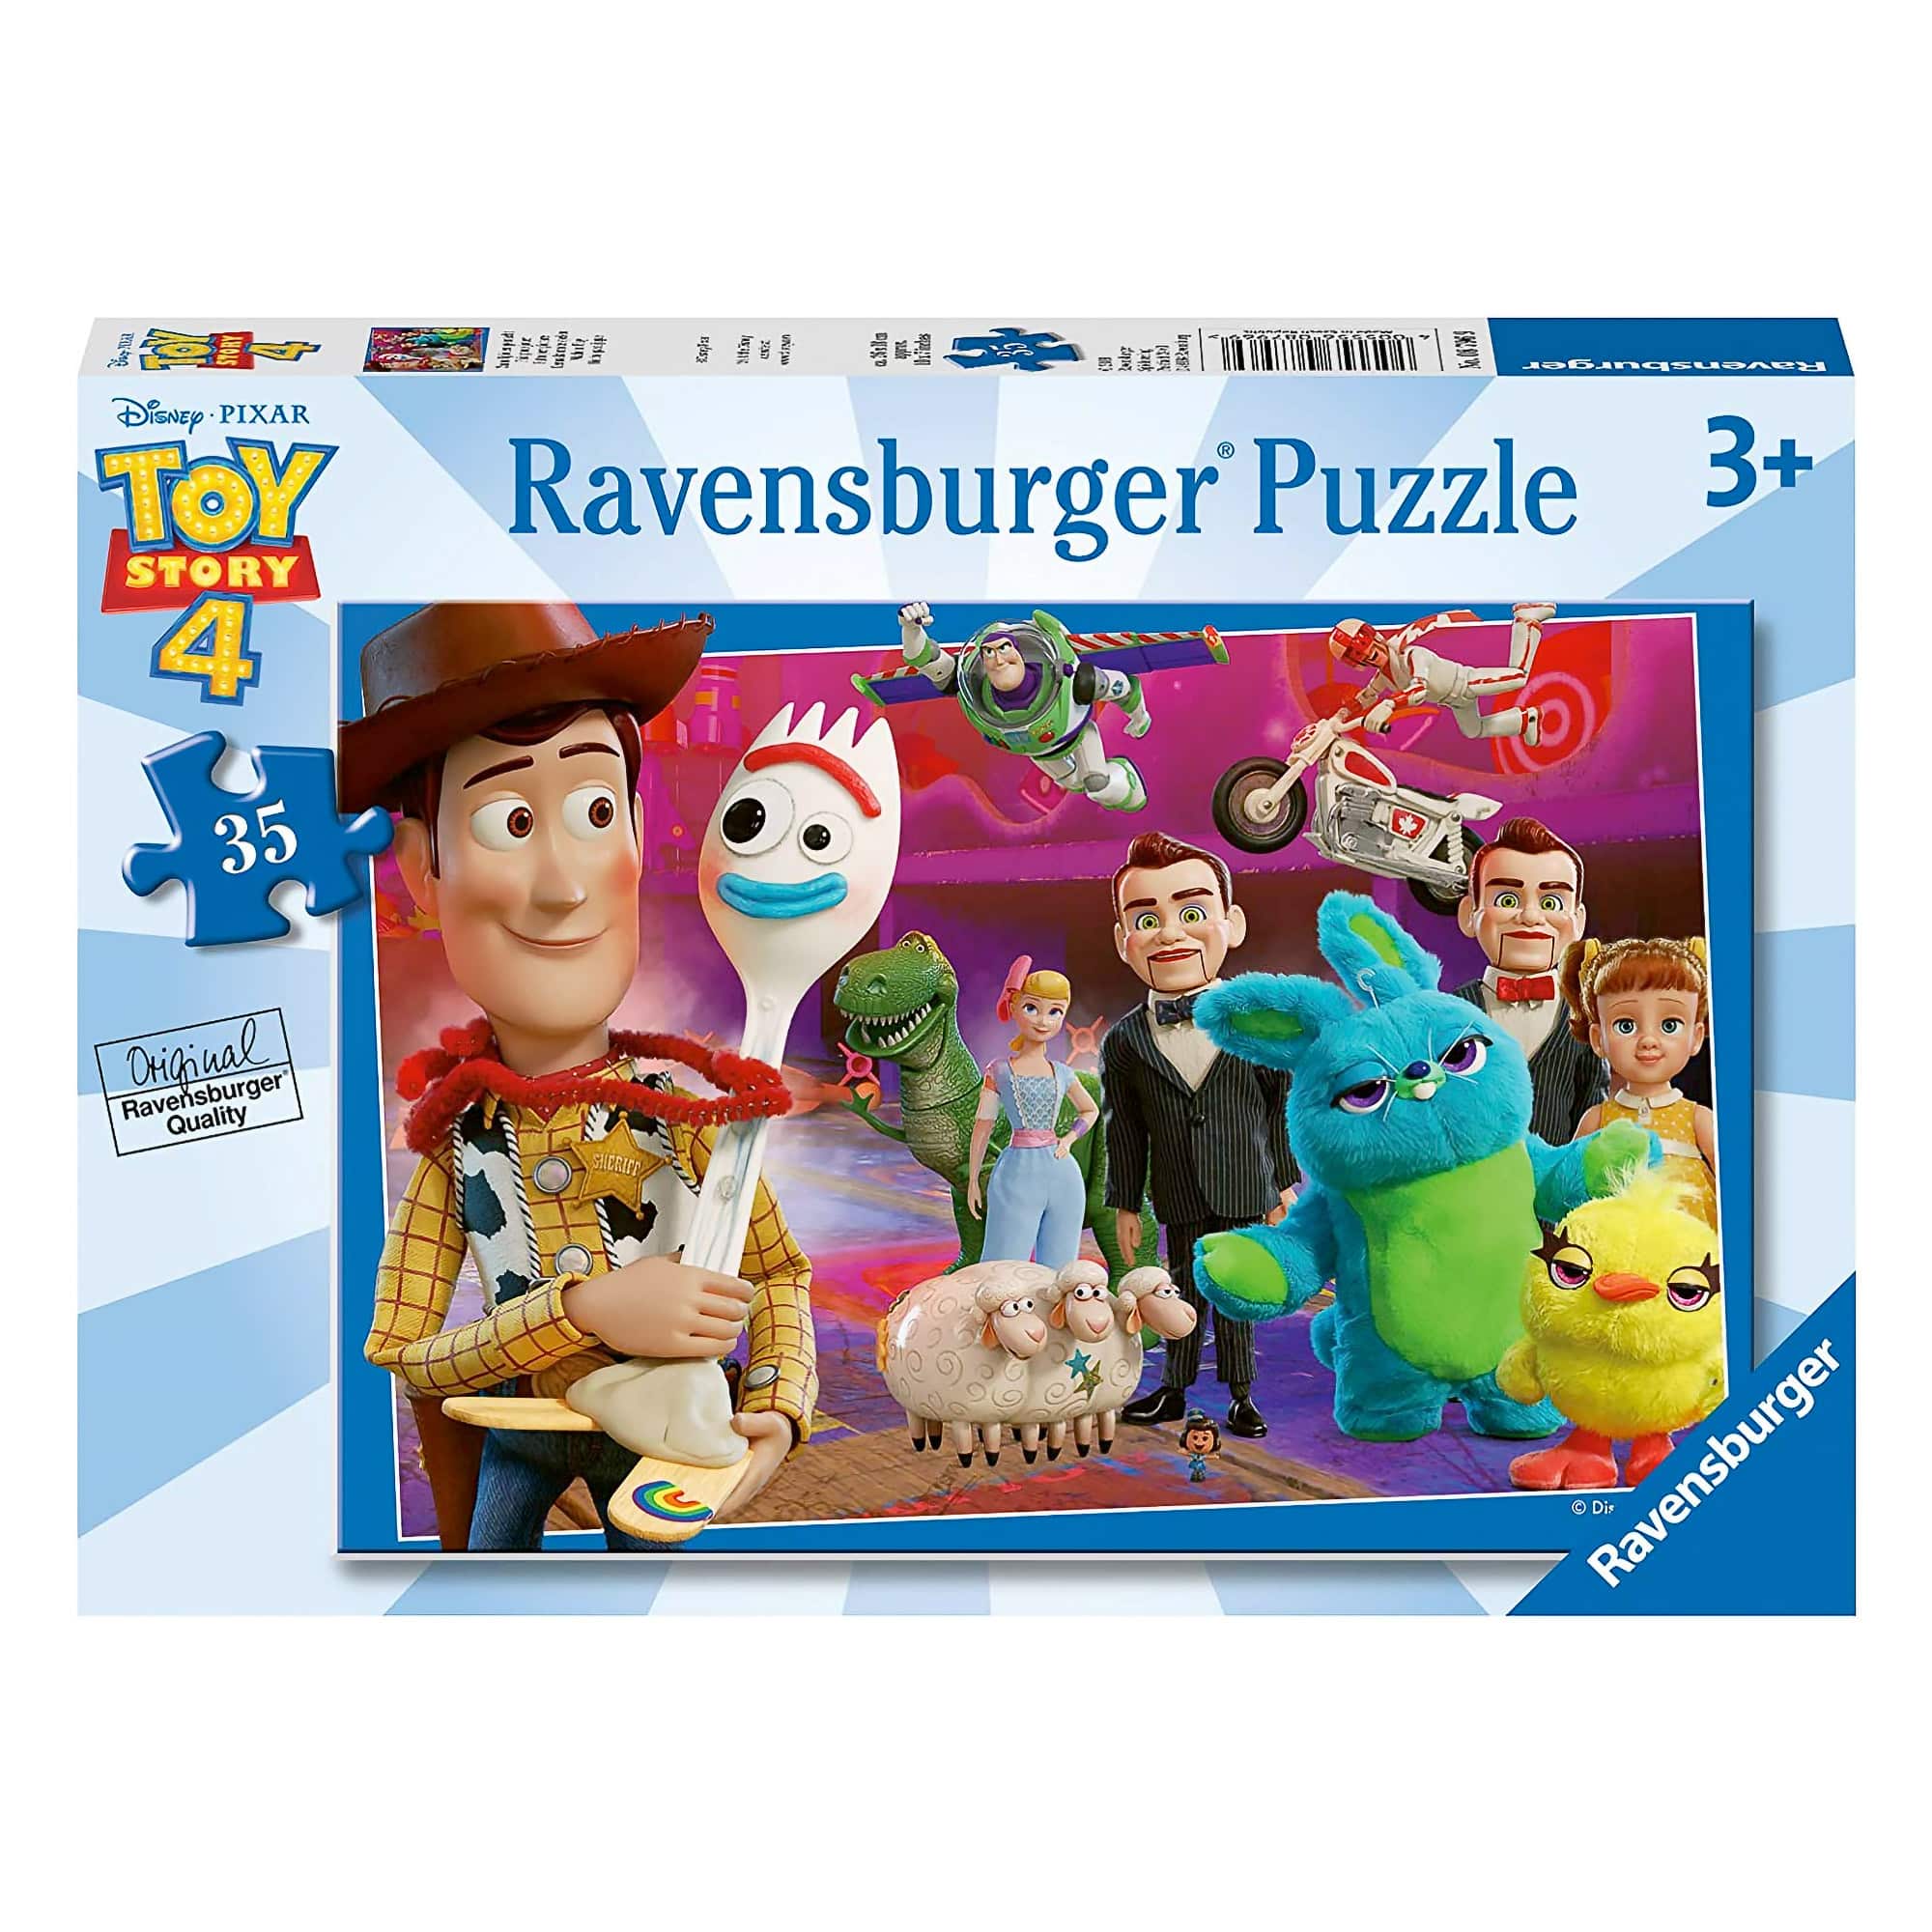 Ravensburger - Toy Story 4 - 35 Piece Jigsaw Puzzle